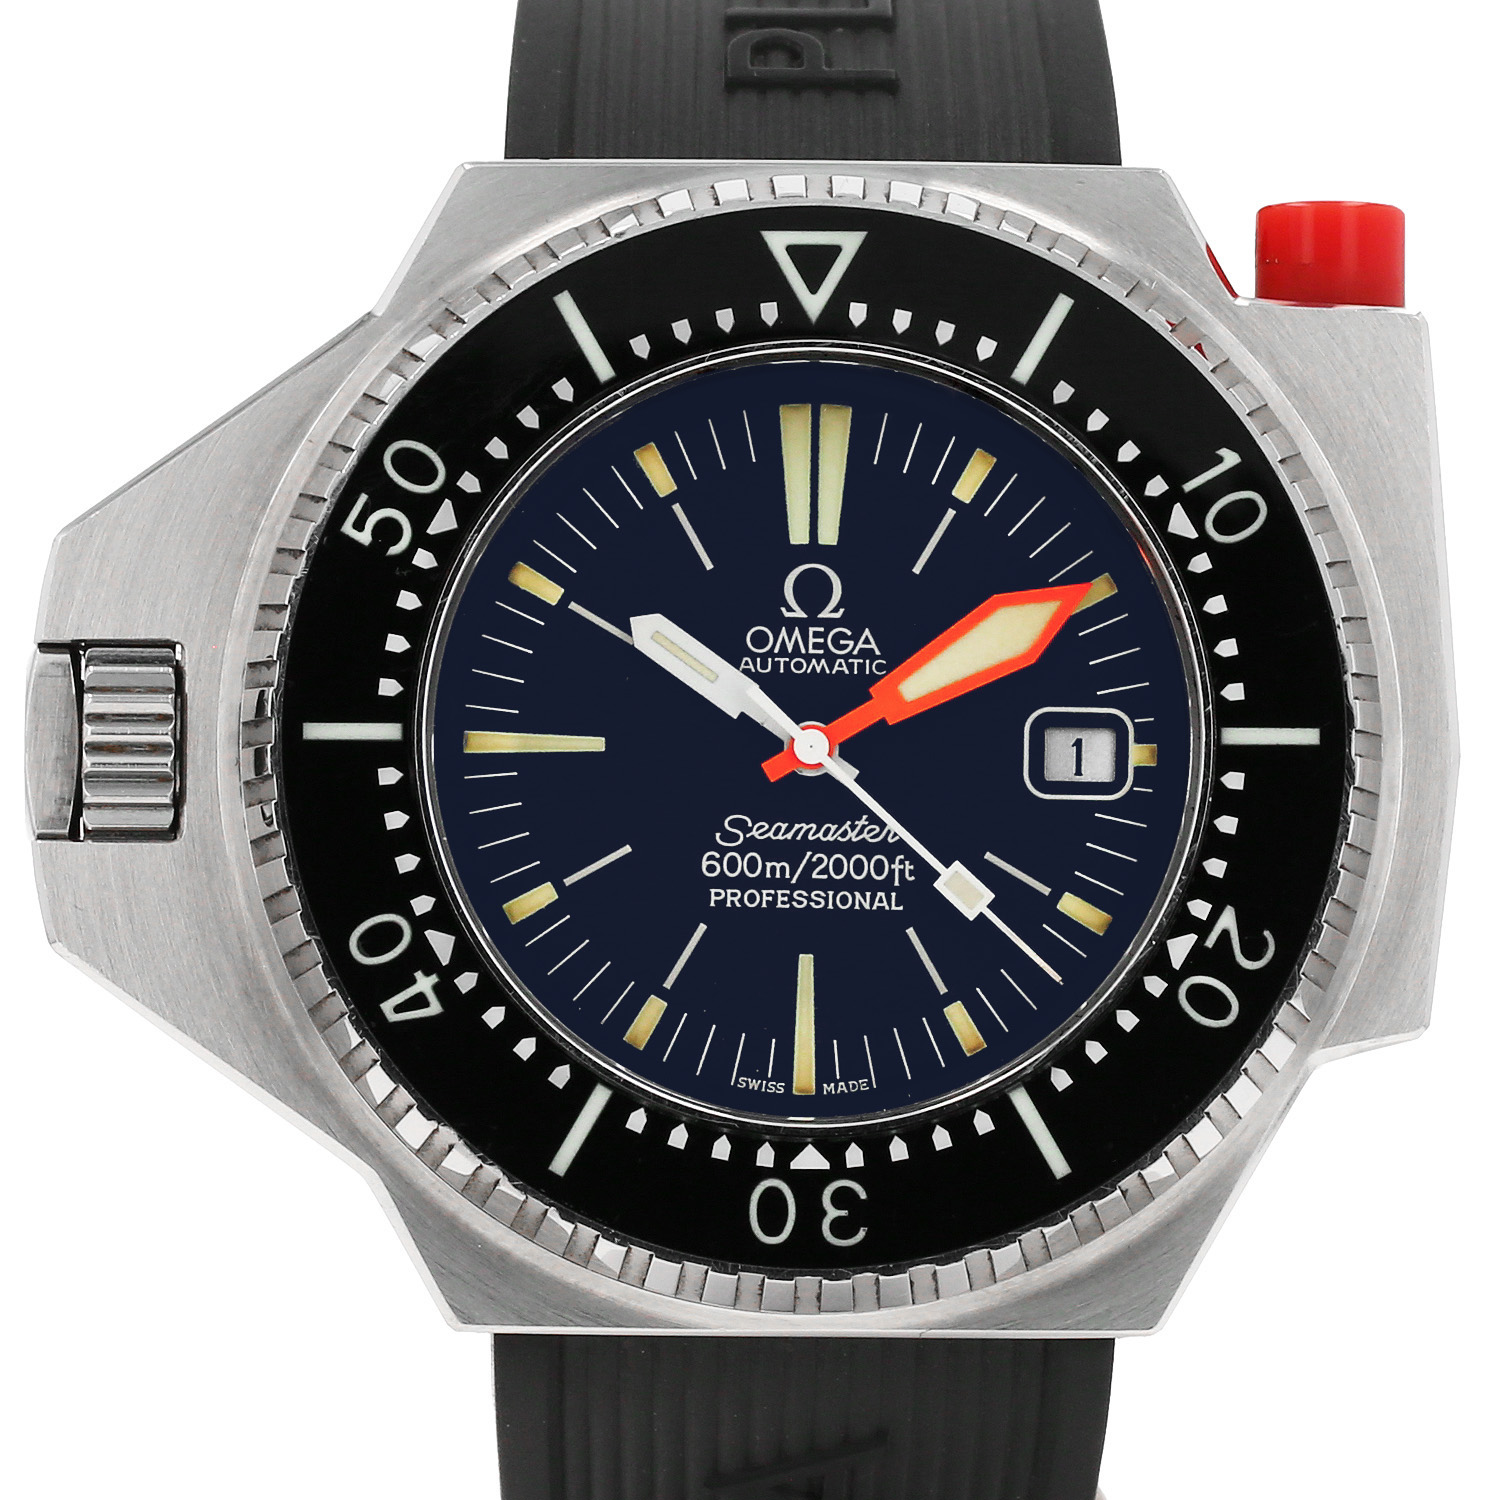 Seamaster Plo Prof In Stainless Steel Ref: 166077